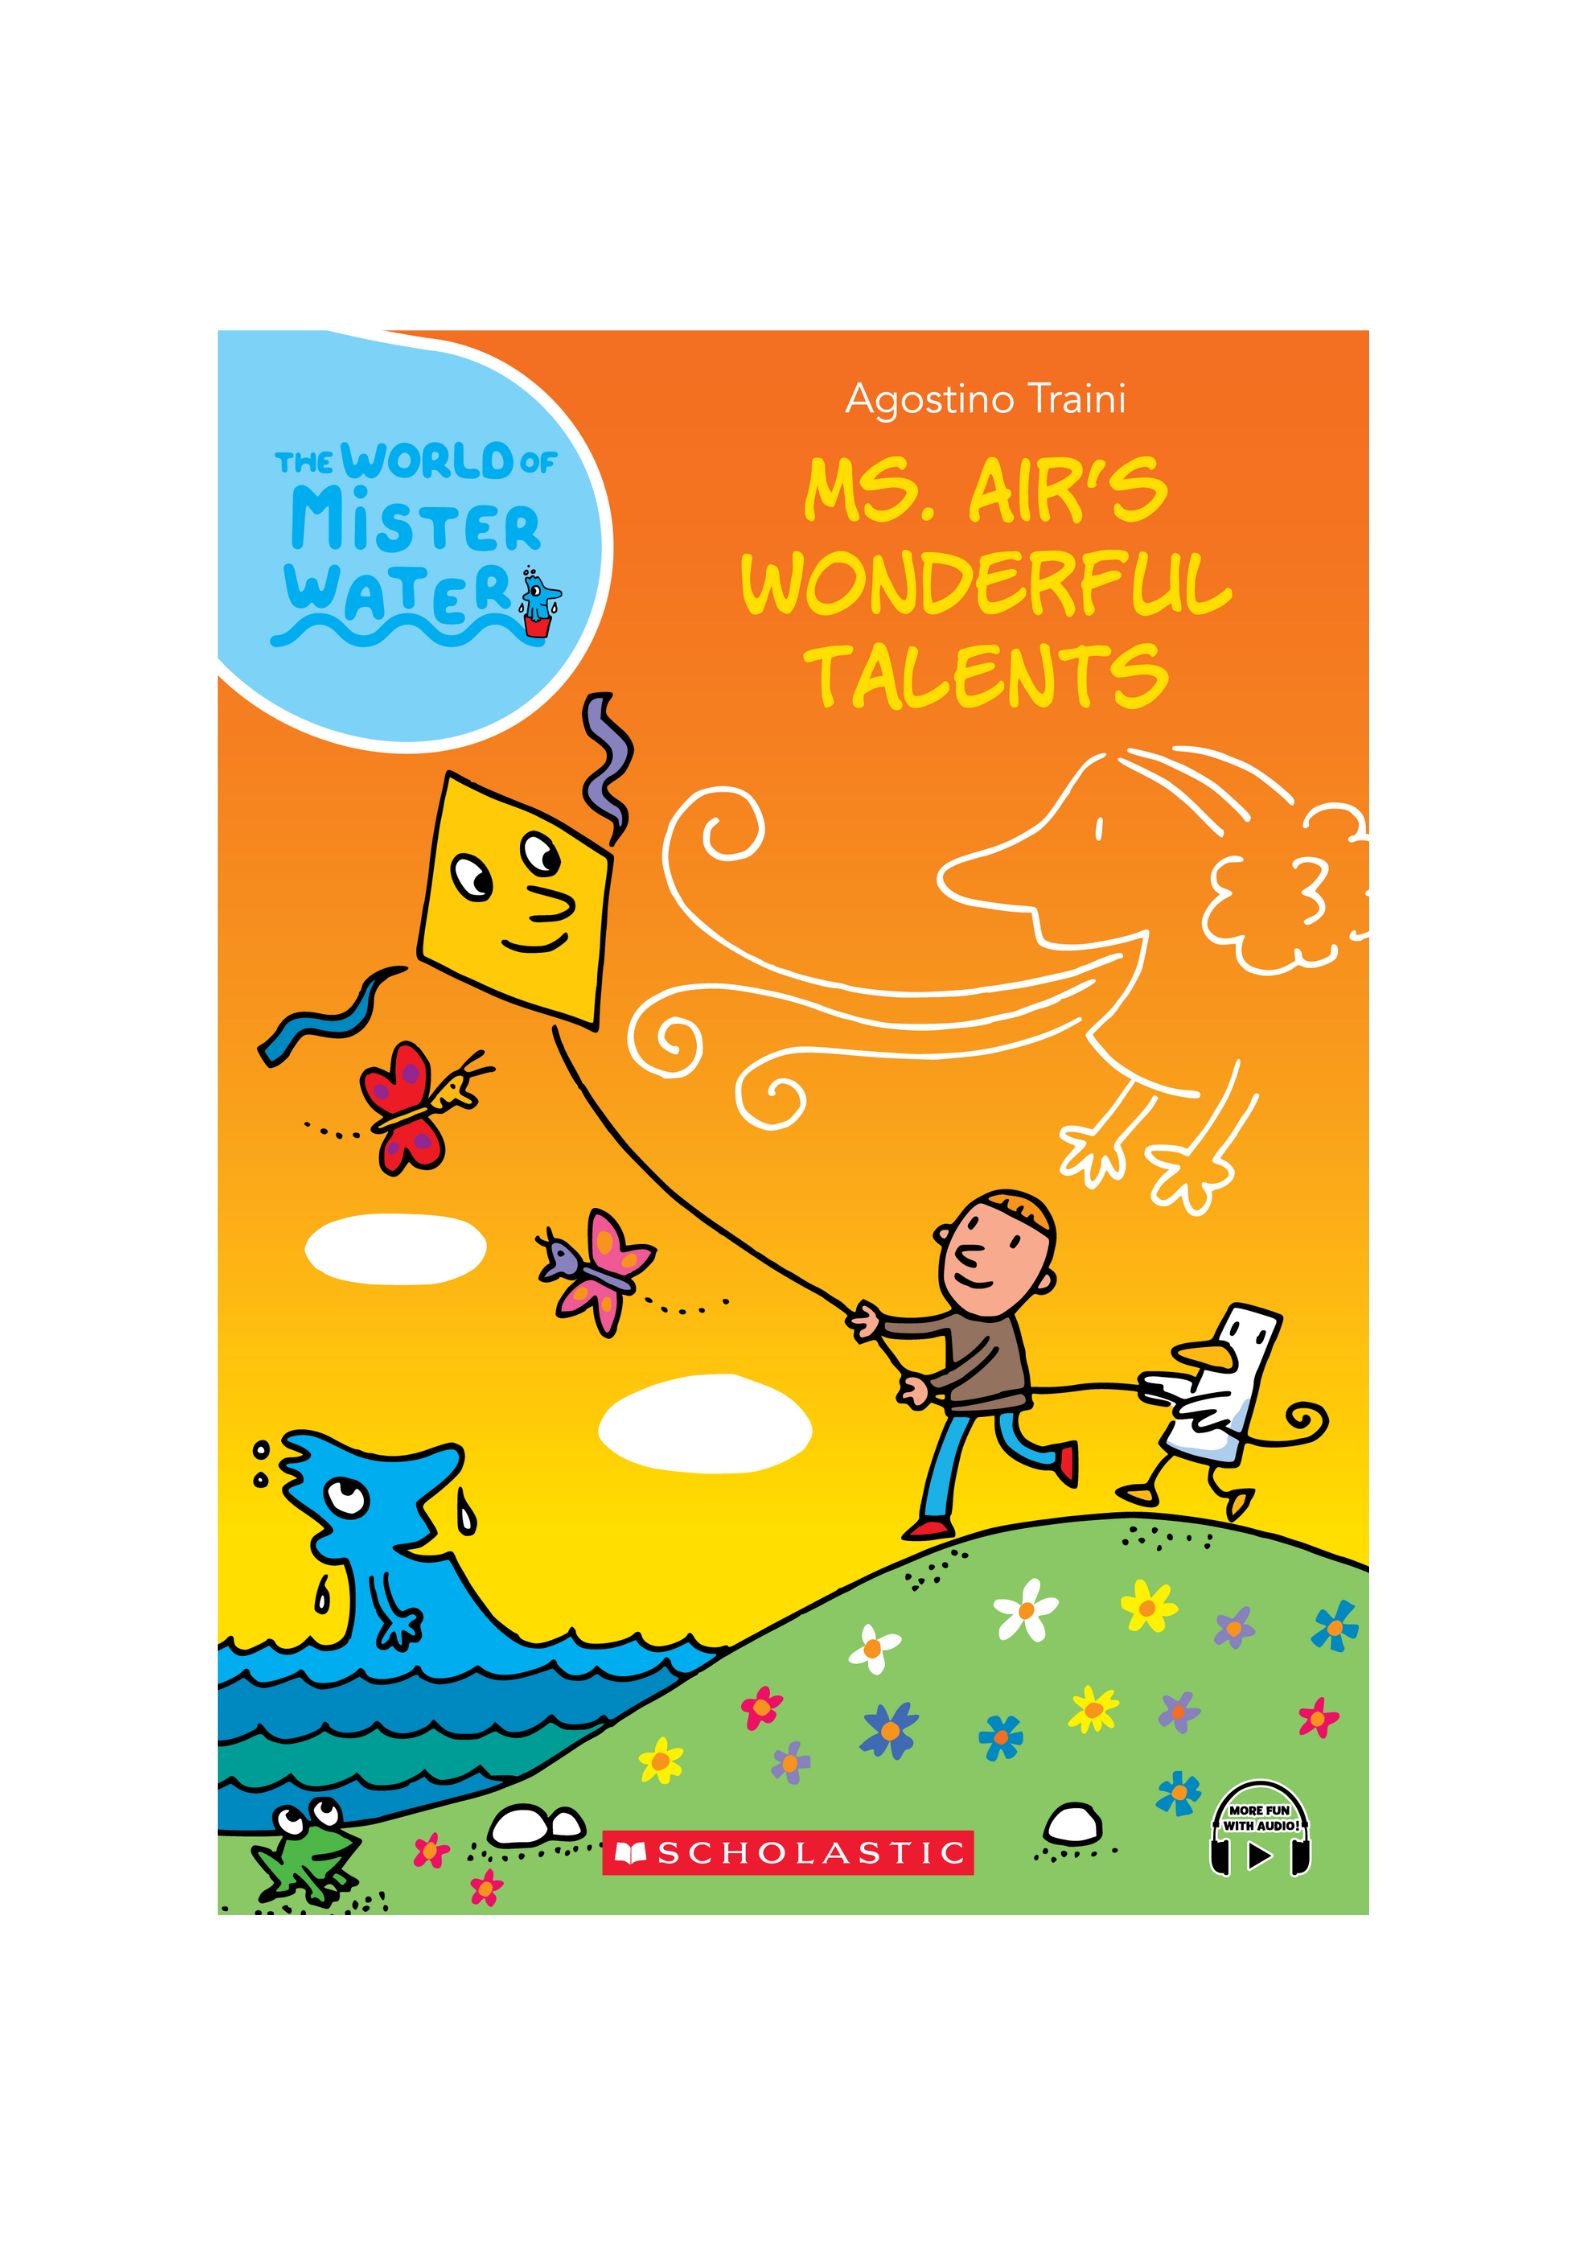 The World of Mister Water #2: Ms. Air’s Wonderful Talents (IN-SE)